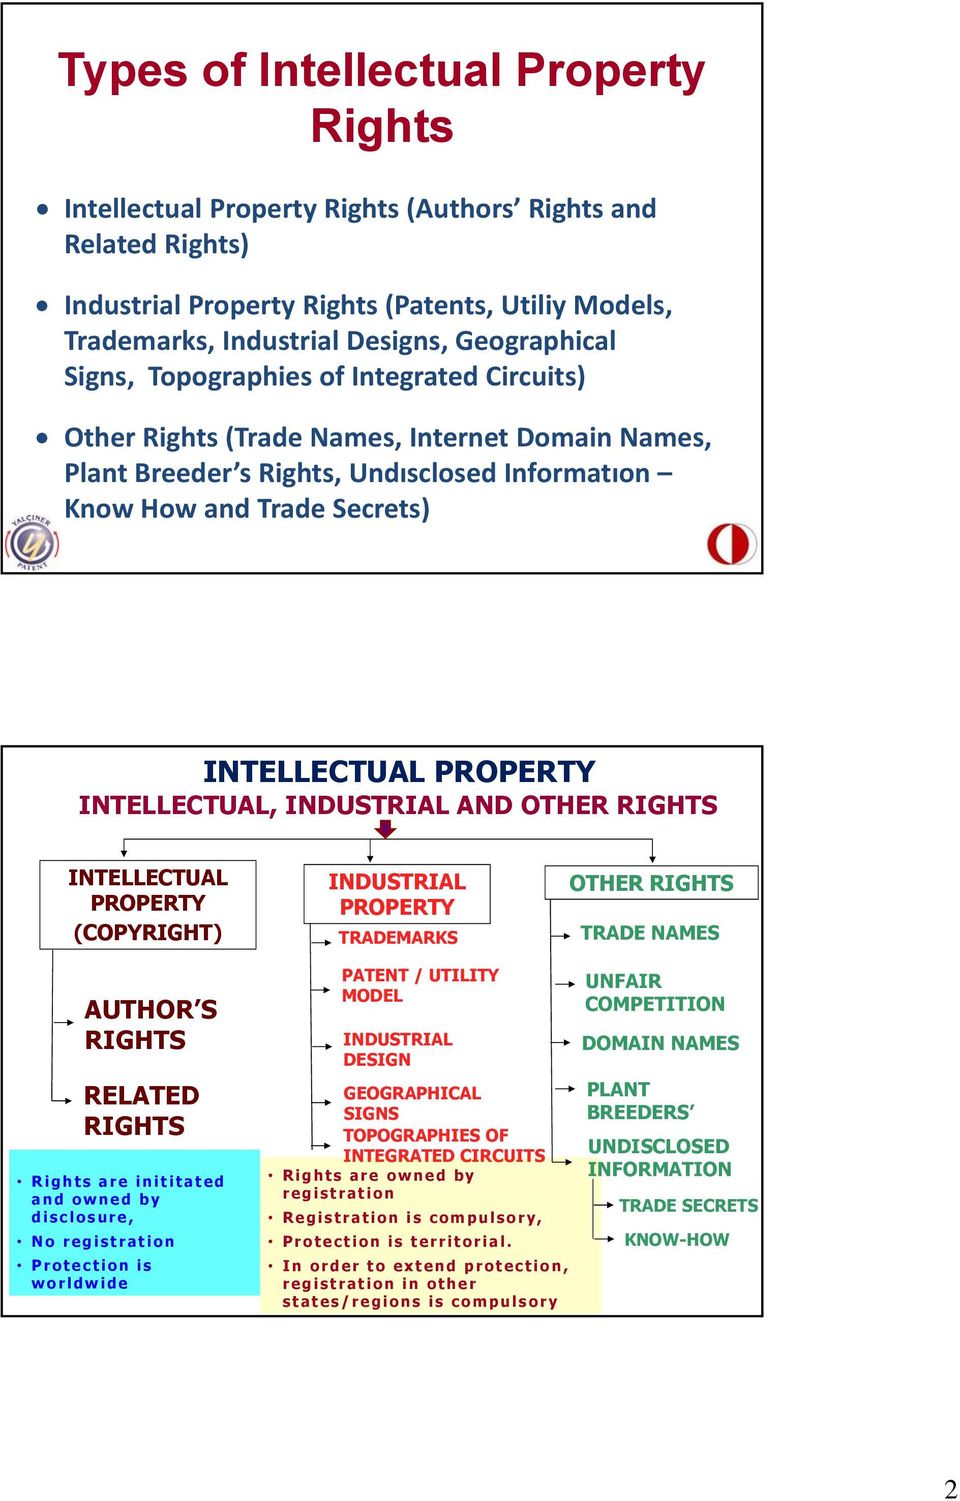 INTELLECTUAL, INDUSTRIAL AND OTHER RIGHTS INTELLECTUAL PROPERTY (COPYRIGHT) AUTHOR S RIGHTS RELATED RIGHTS Rights are inititated and owned by disclosure, No registration Protection is worldwide